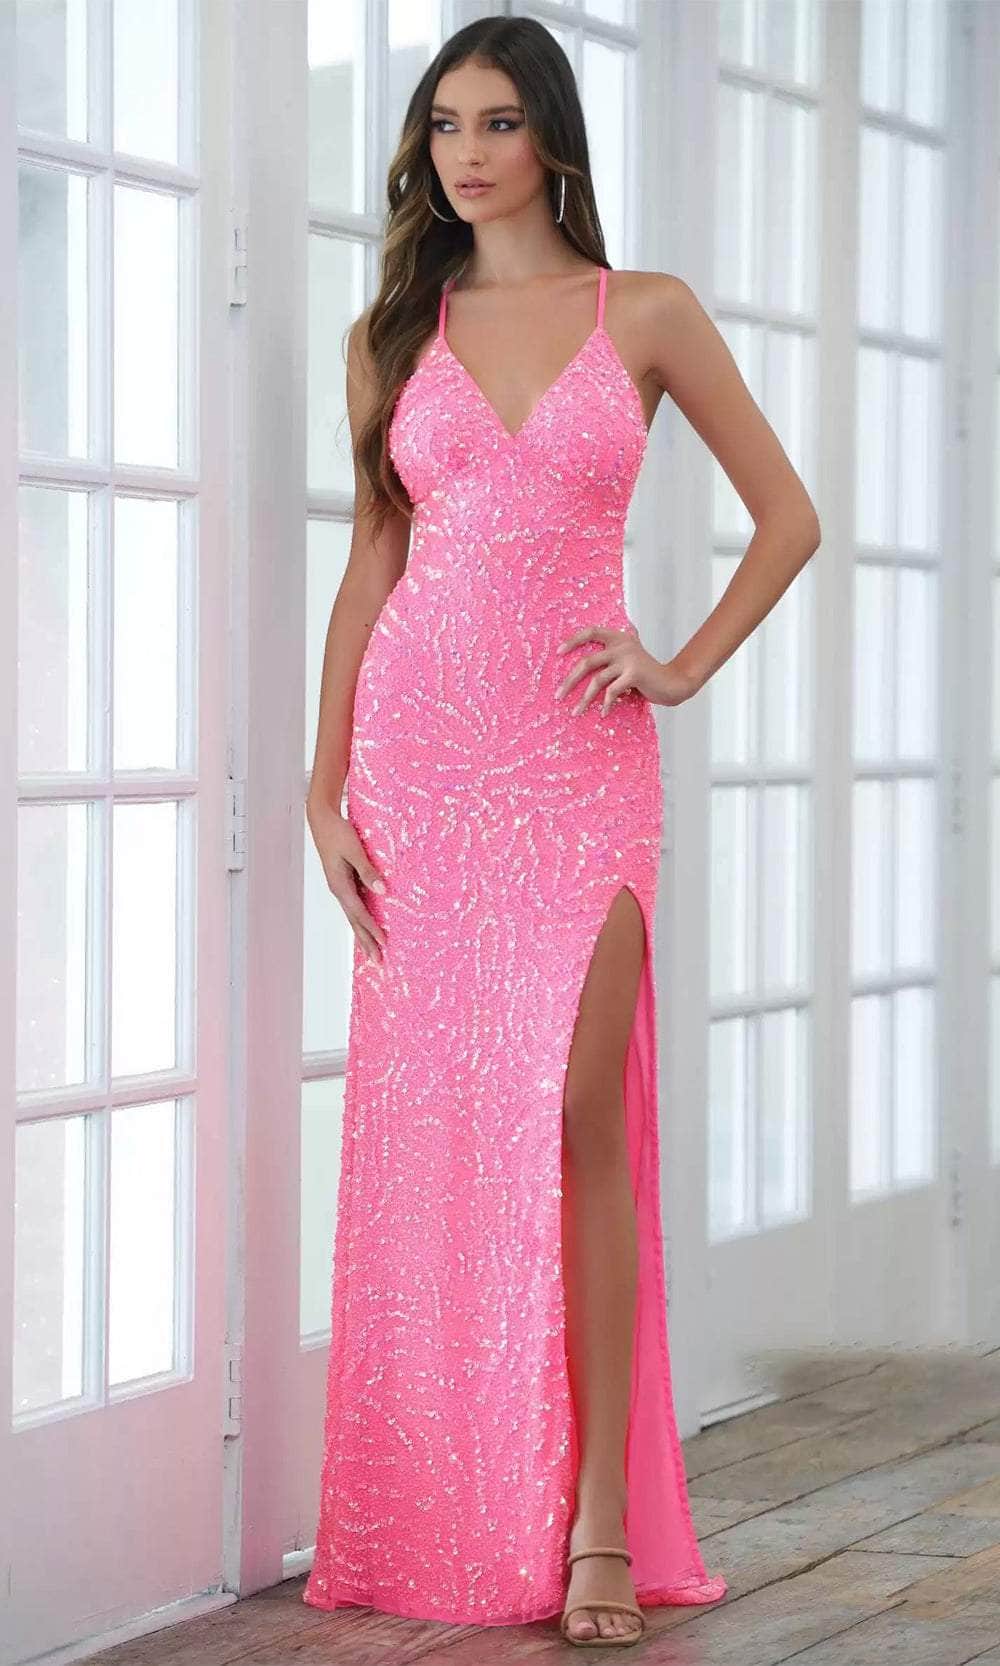 Aleta Couture 882 - Sequin Open Back Gown Evening Dresses 000 / Freeze Pink